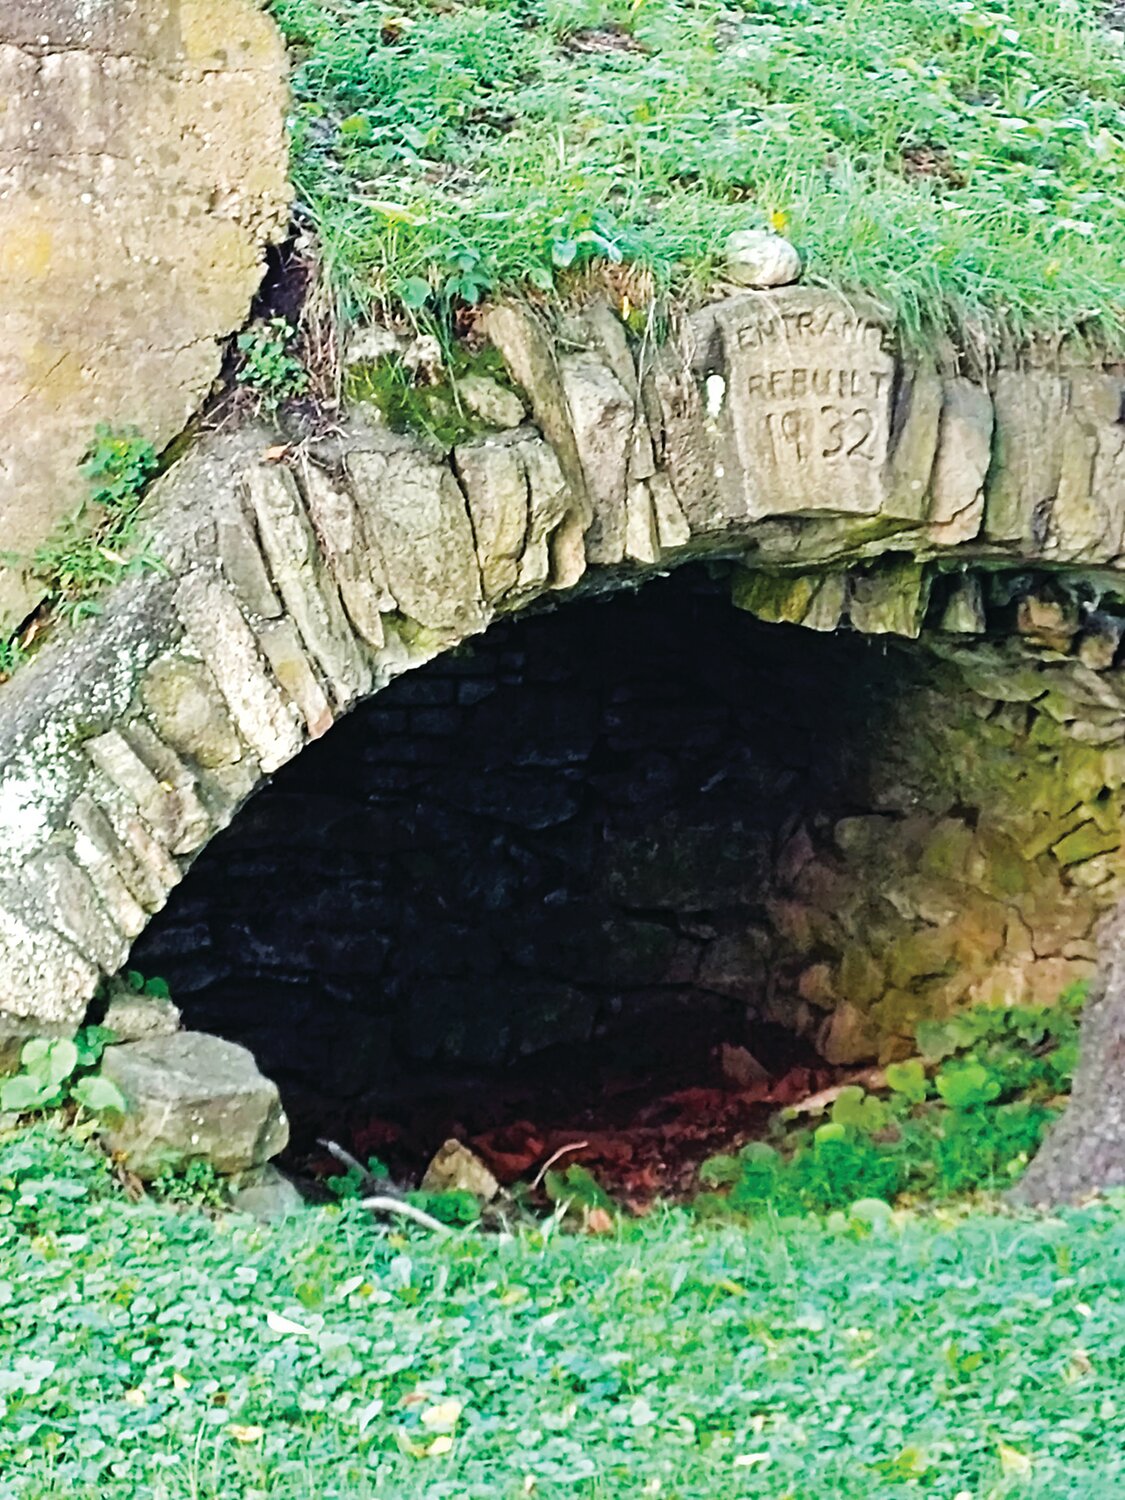 Stone archway marks the entrance to the original 1727 Durham Furnace on the banks of Cooks Creek.